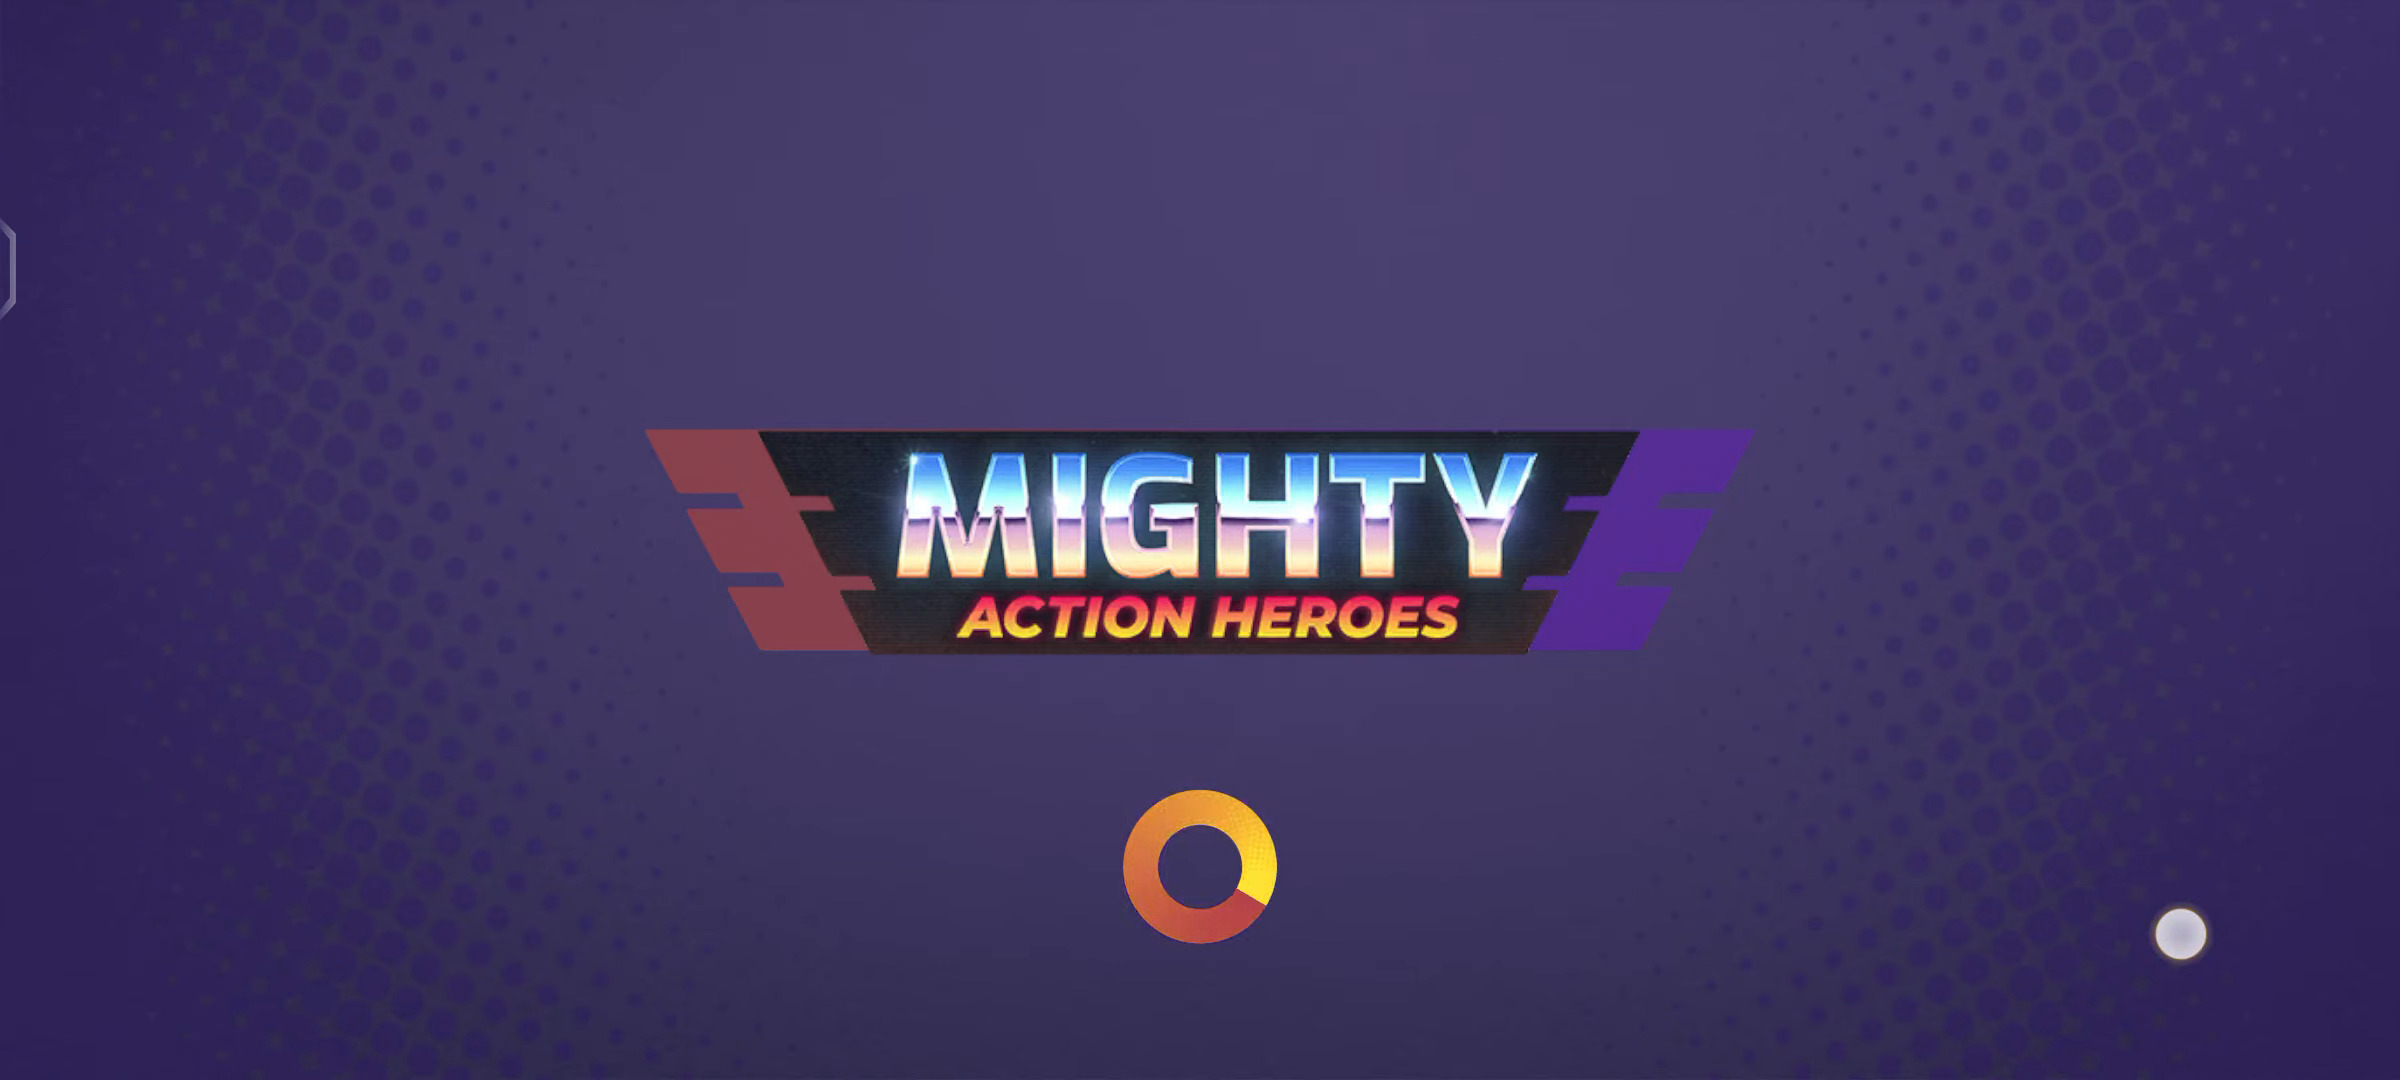 Baixar Mighty Action Heroes para Android grátis.